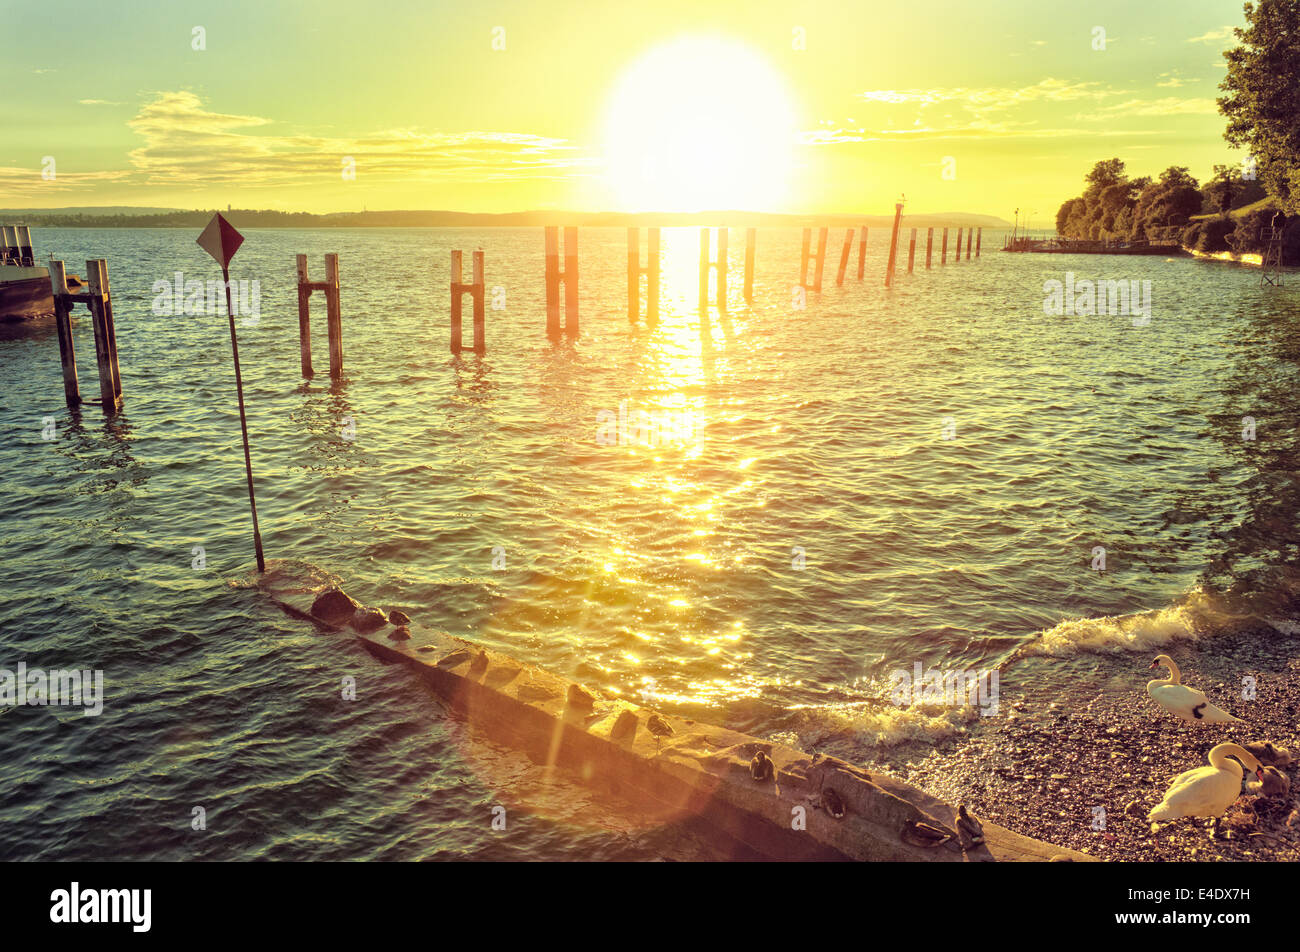 Sunset at Lake Constance. Meersburg. Baden-Württemberg, Germany. Stock Photo